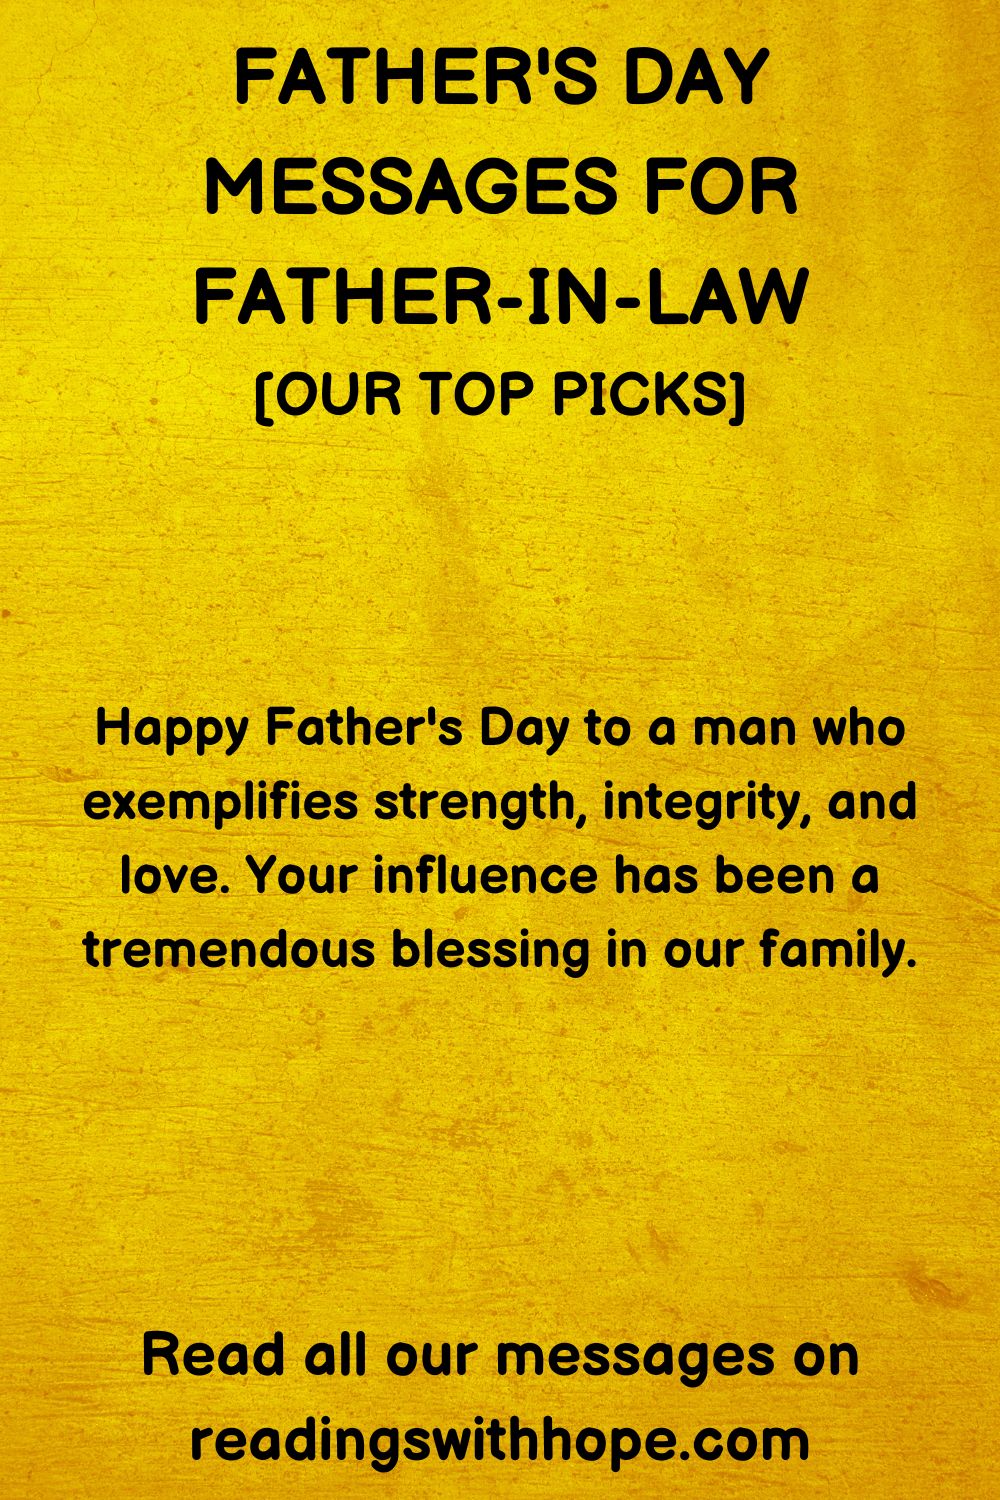 46 Father's Day Messages For Father-In-Law